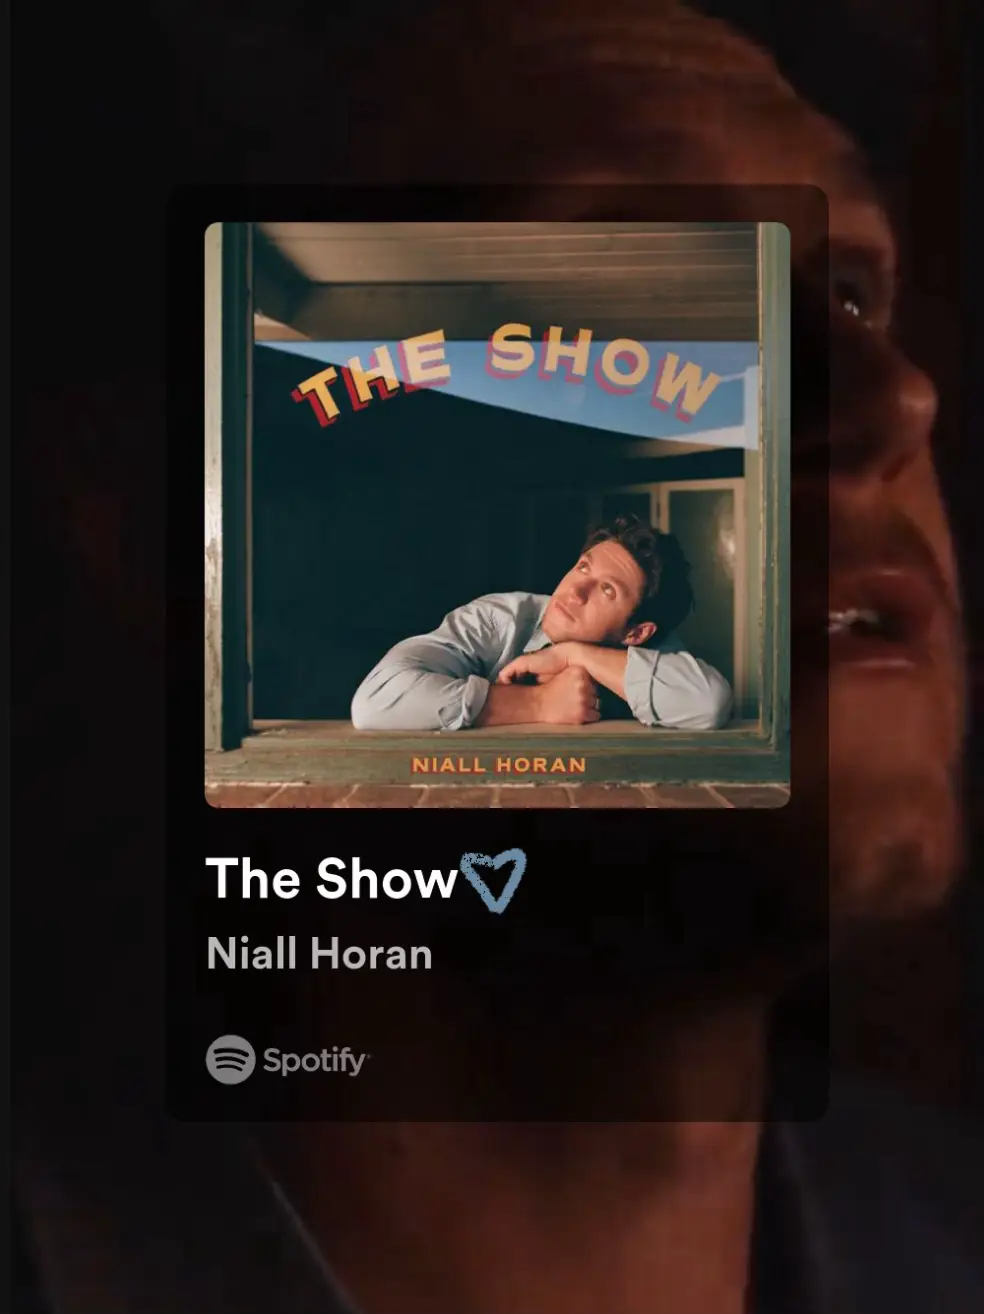  A Spotify playlist of The Show by Niall Horan.